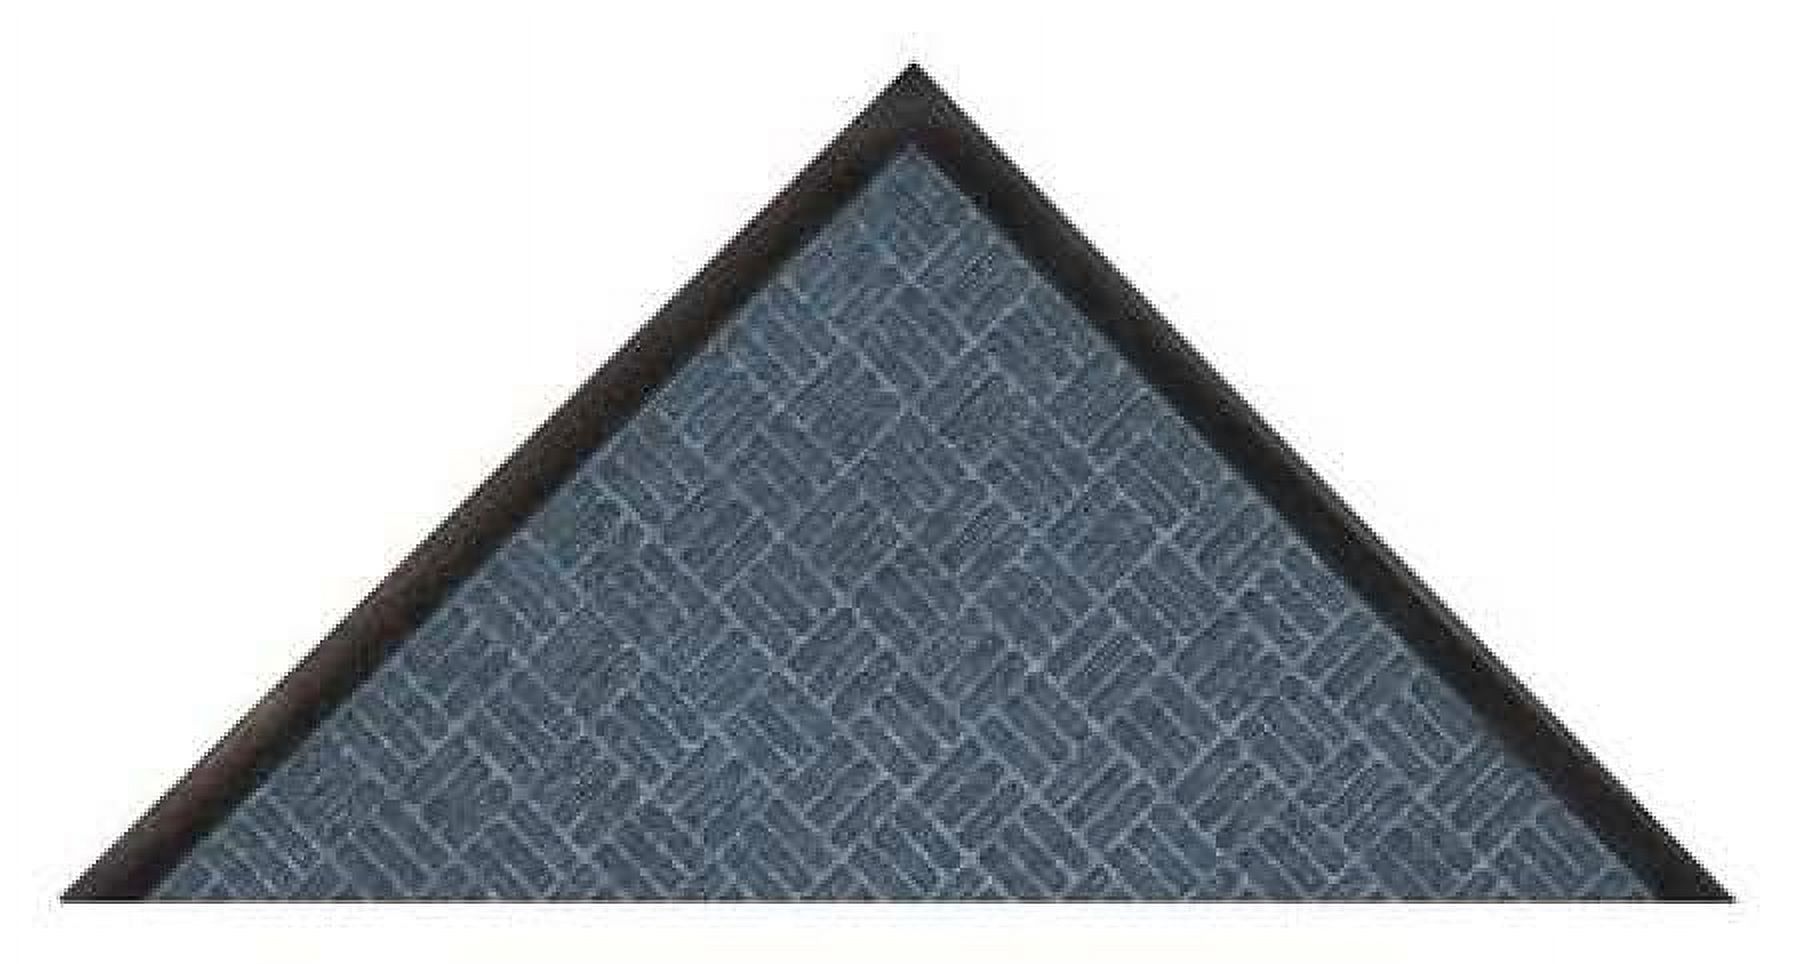 Notrax Carpeted Entrance Mat,Blue,3ft. x 5ft.  167S0035BU - image 4 of 5